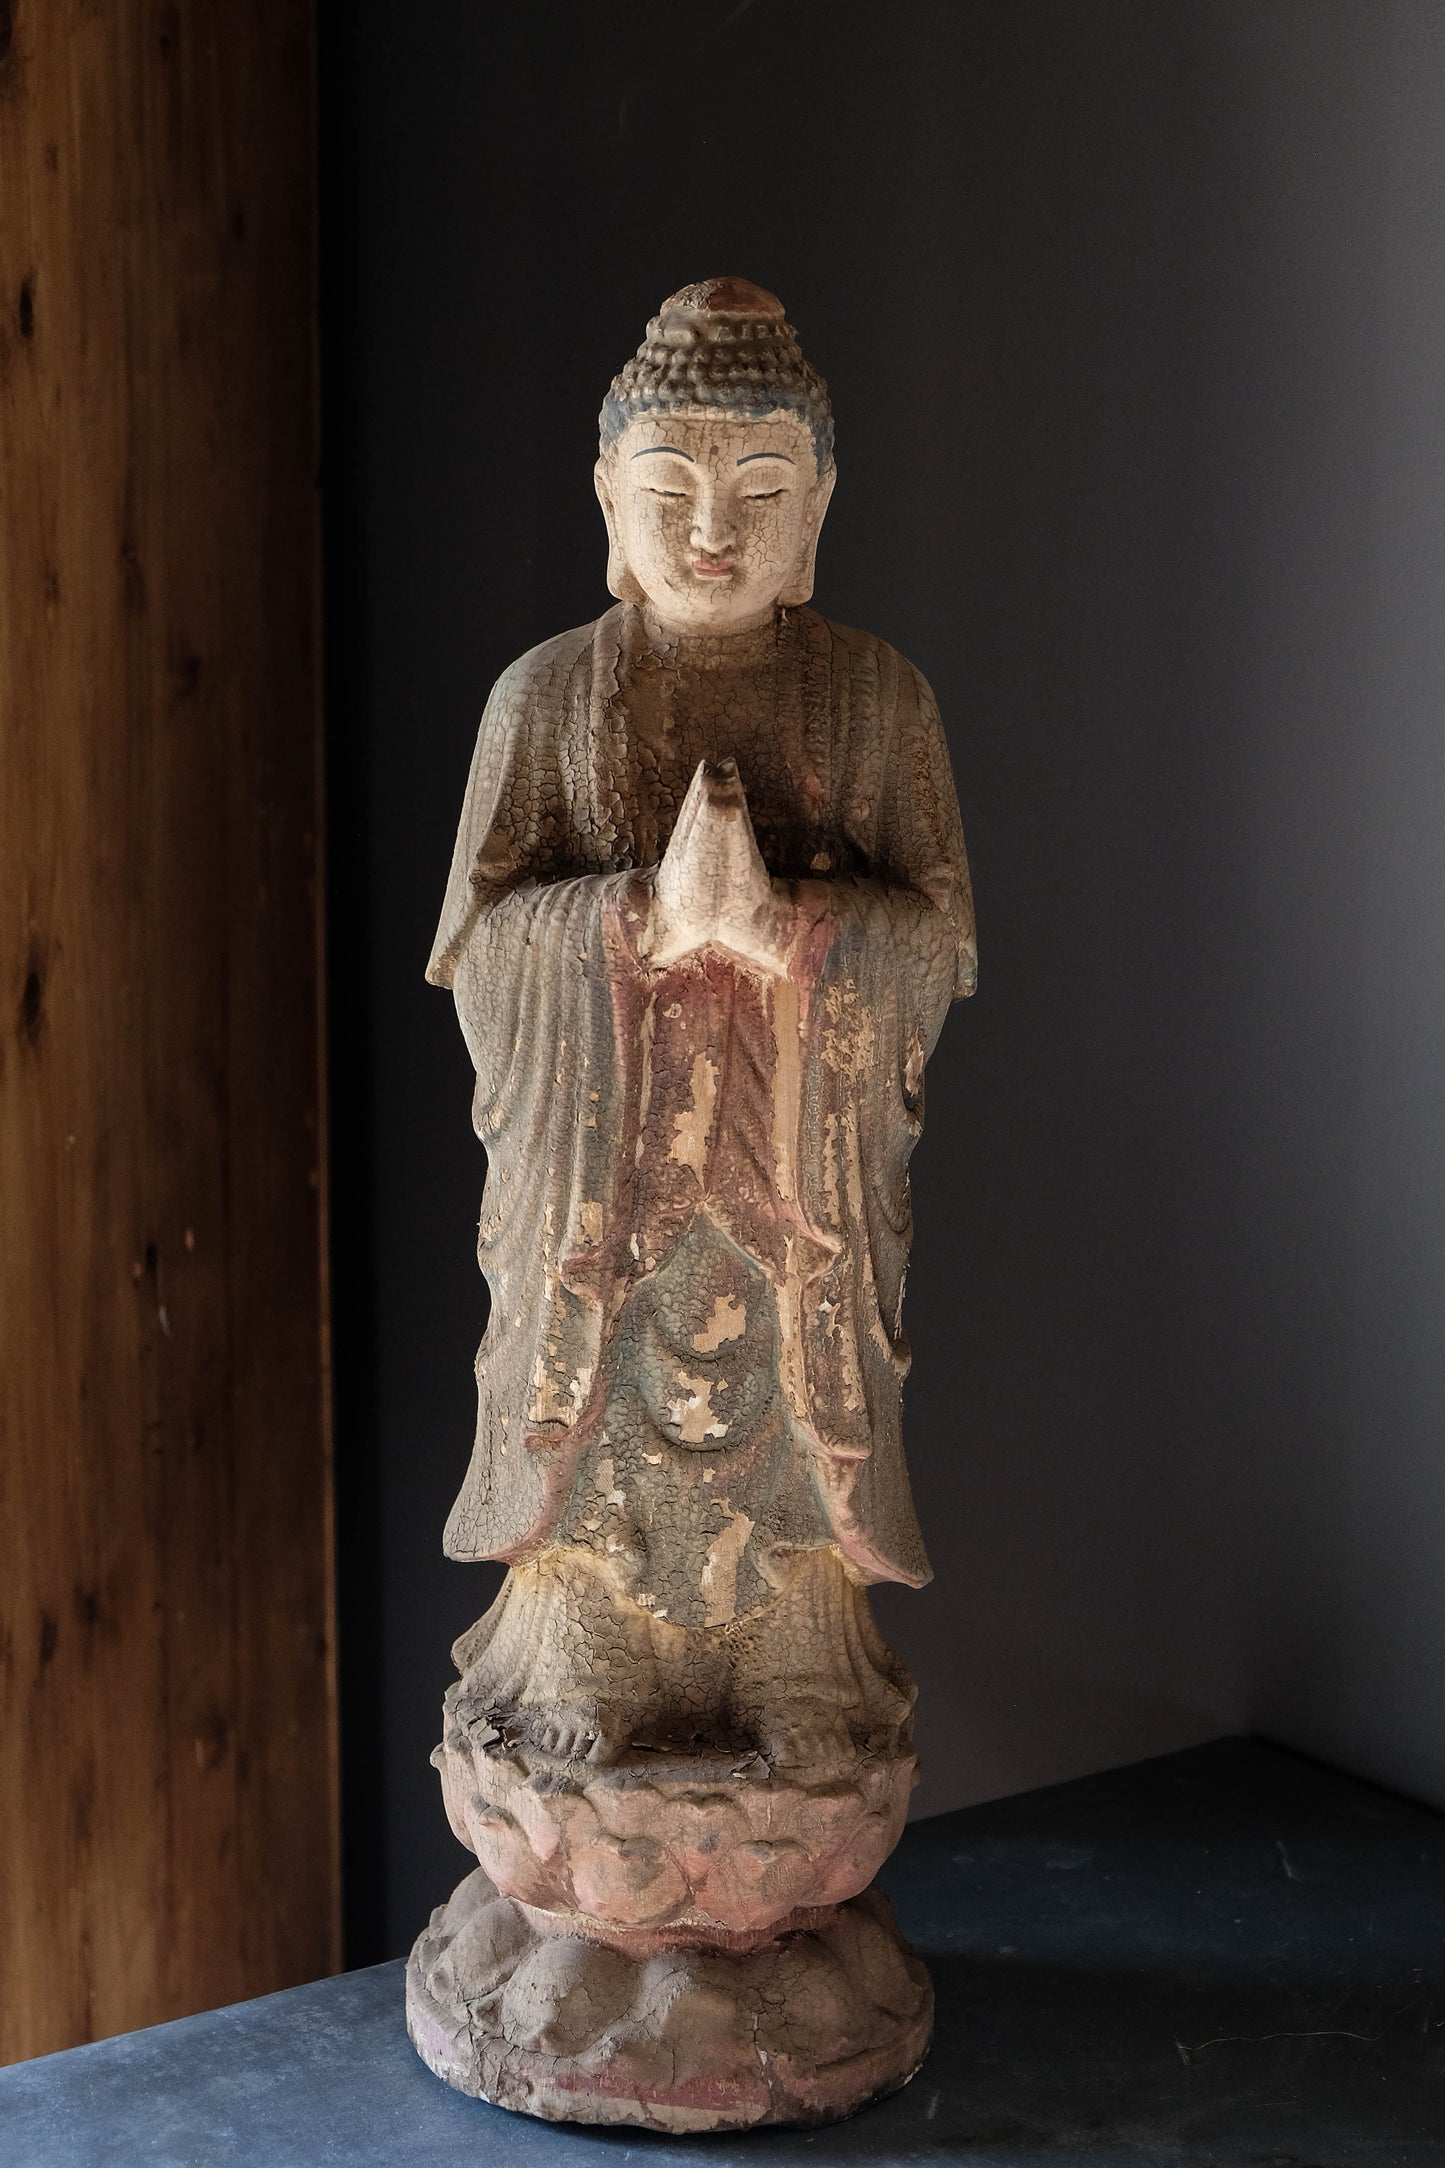 Carved Wooden Buddha Statue